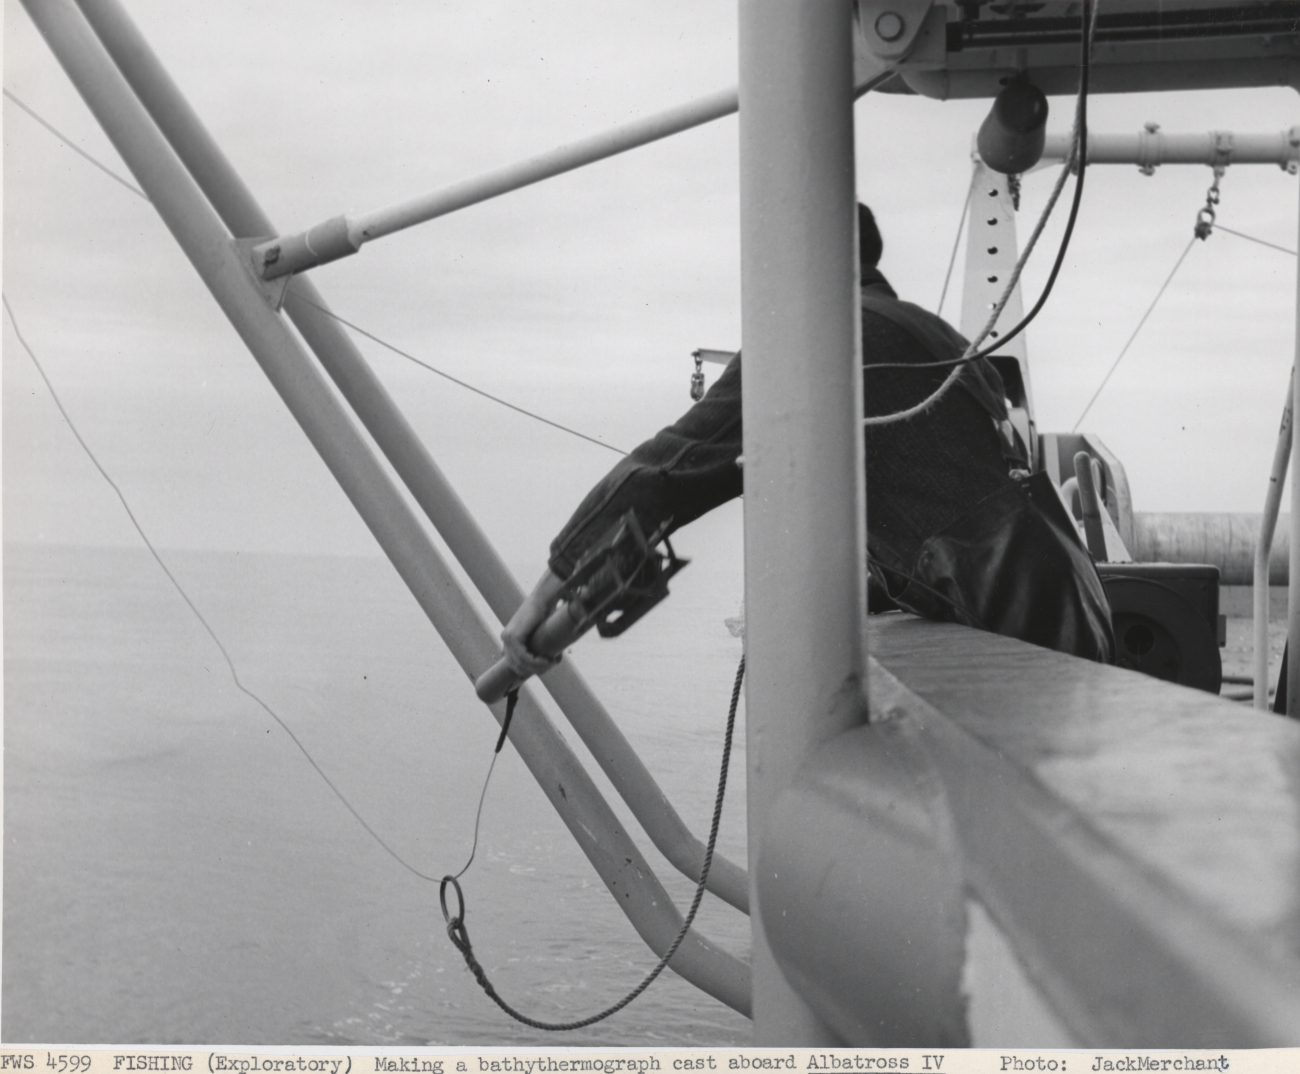 Making a bathythermograph cast aboard the ALBATROSS IV